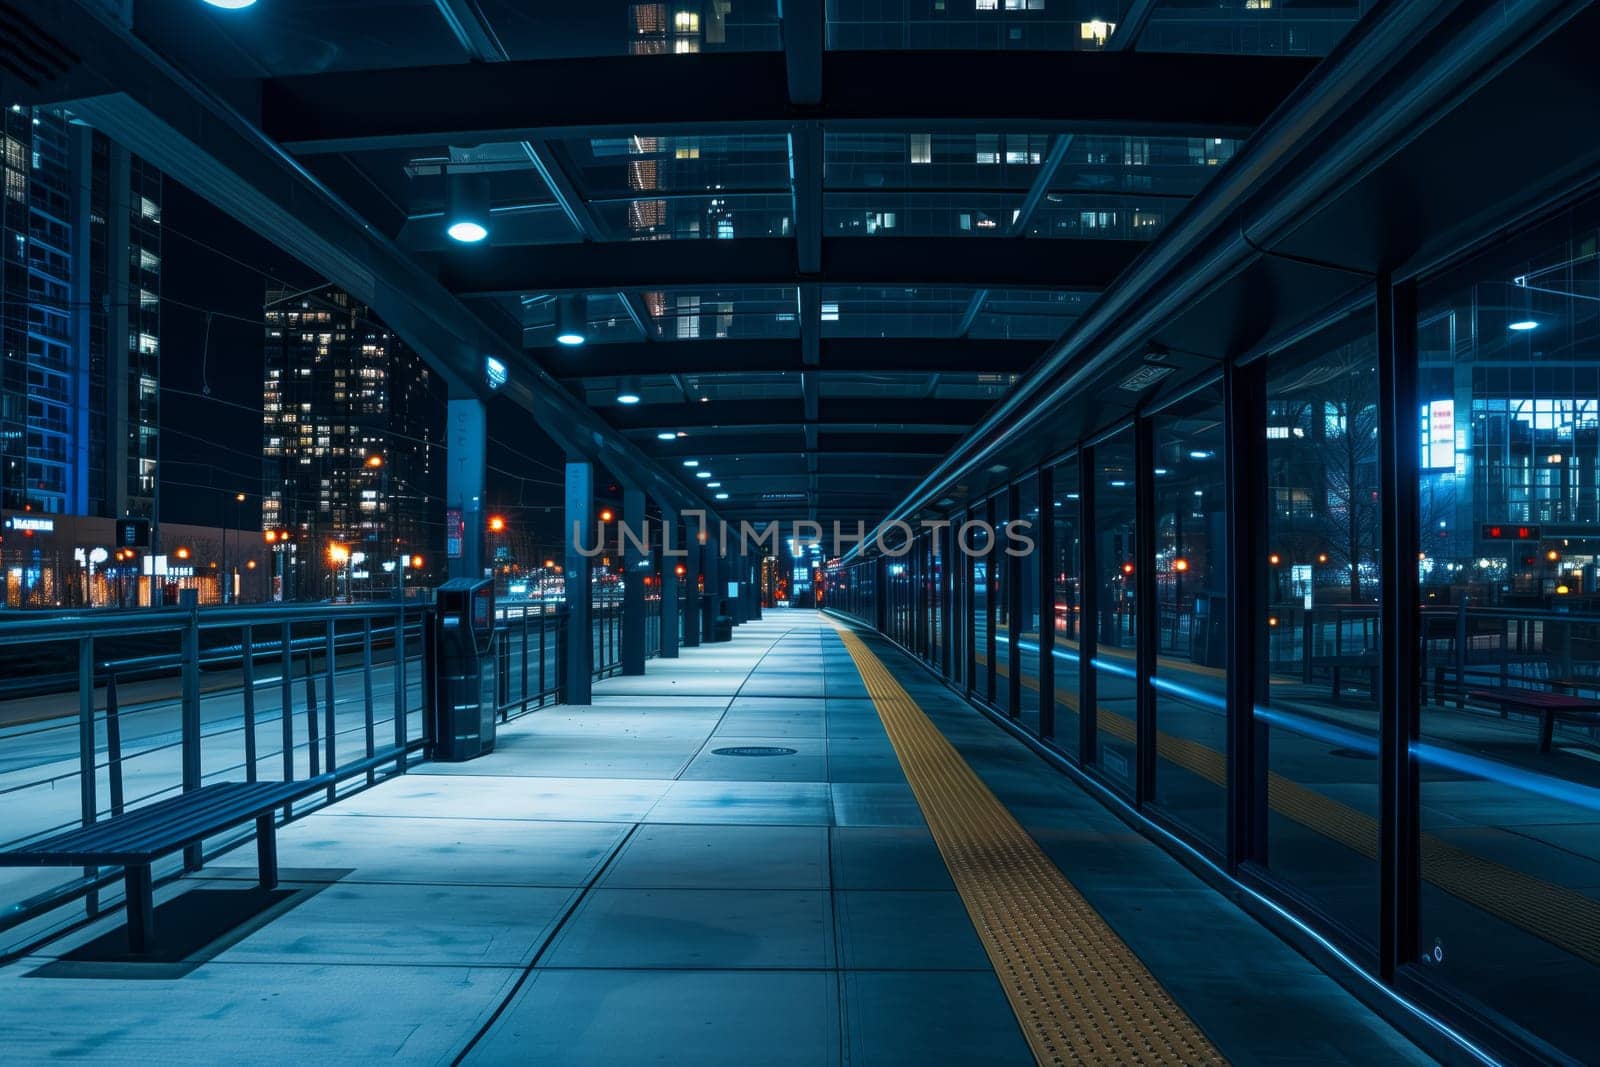 An abandoned train station at night with a bench in the foreground. The commercial buildings glass and metal fixtures shine under electric blue lights, highlighting the symmetry of city engineering